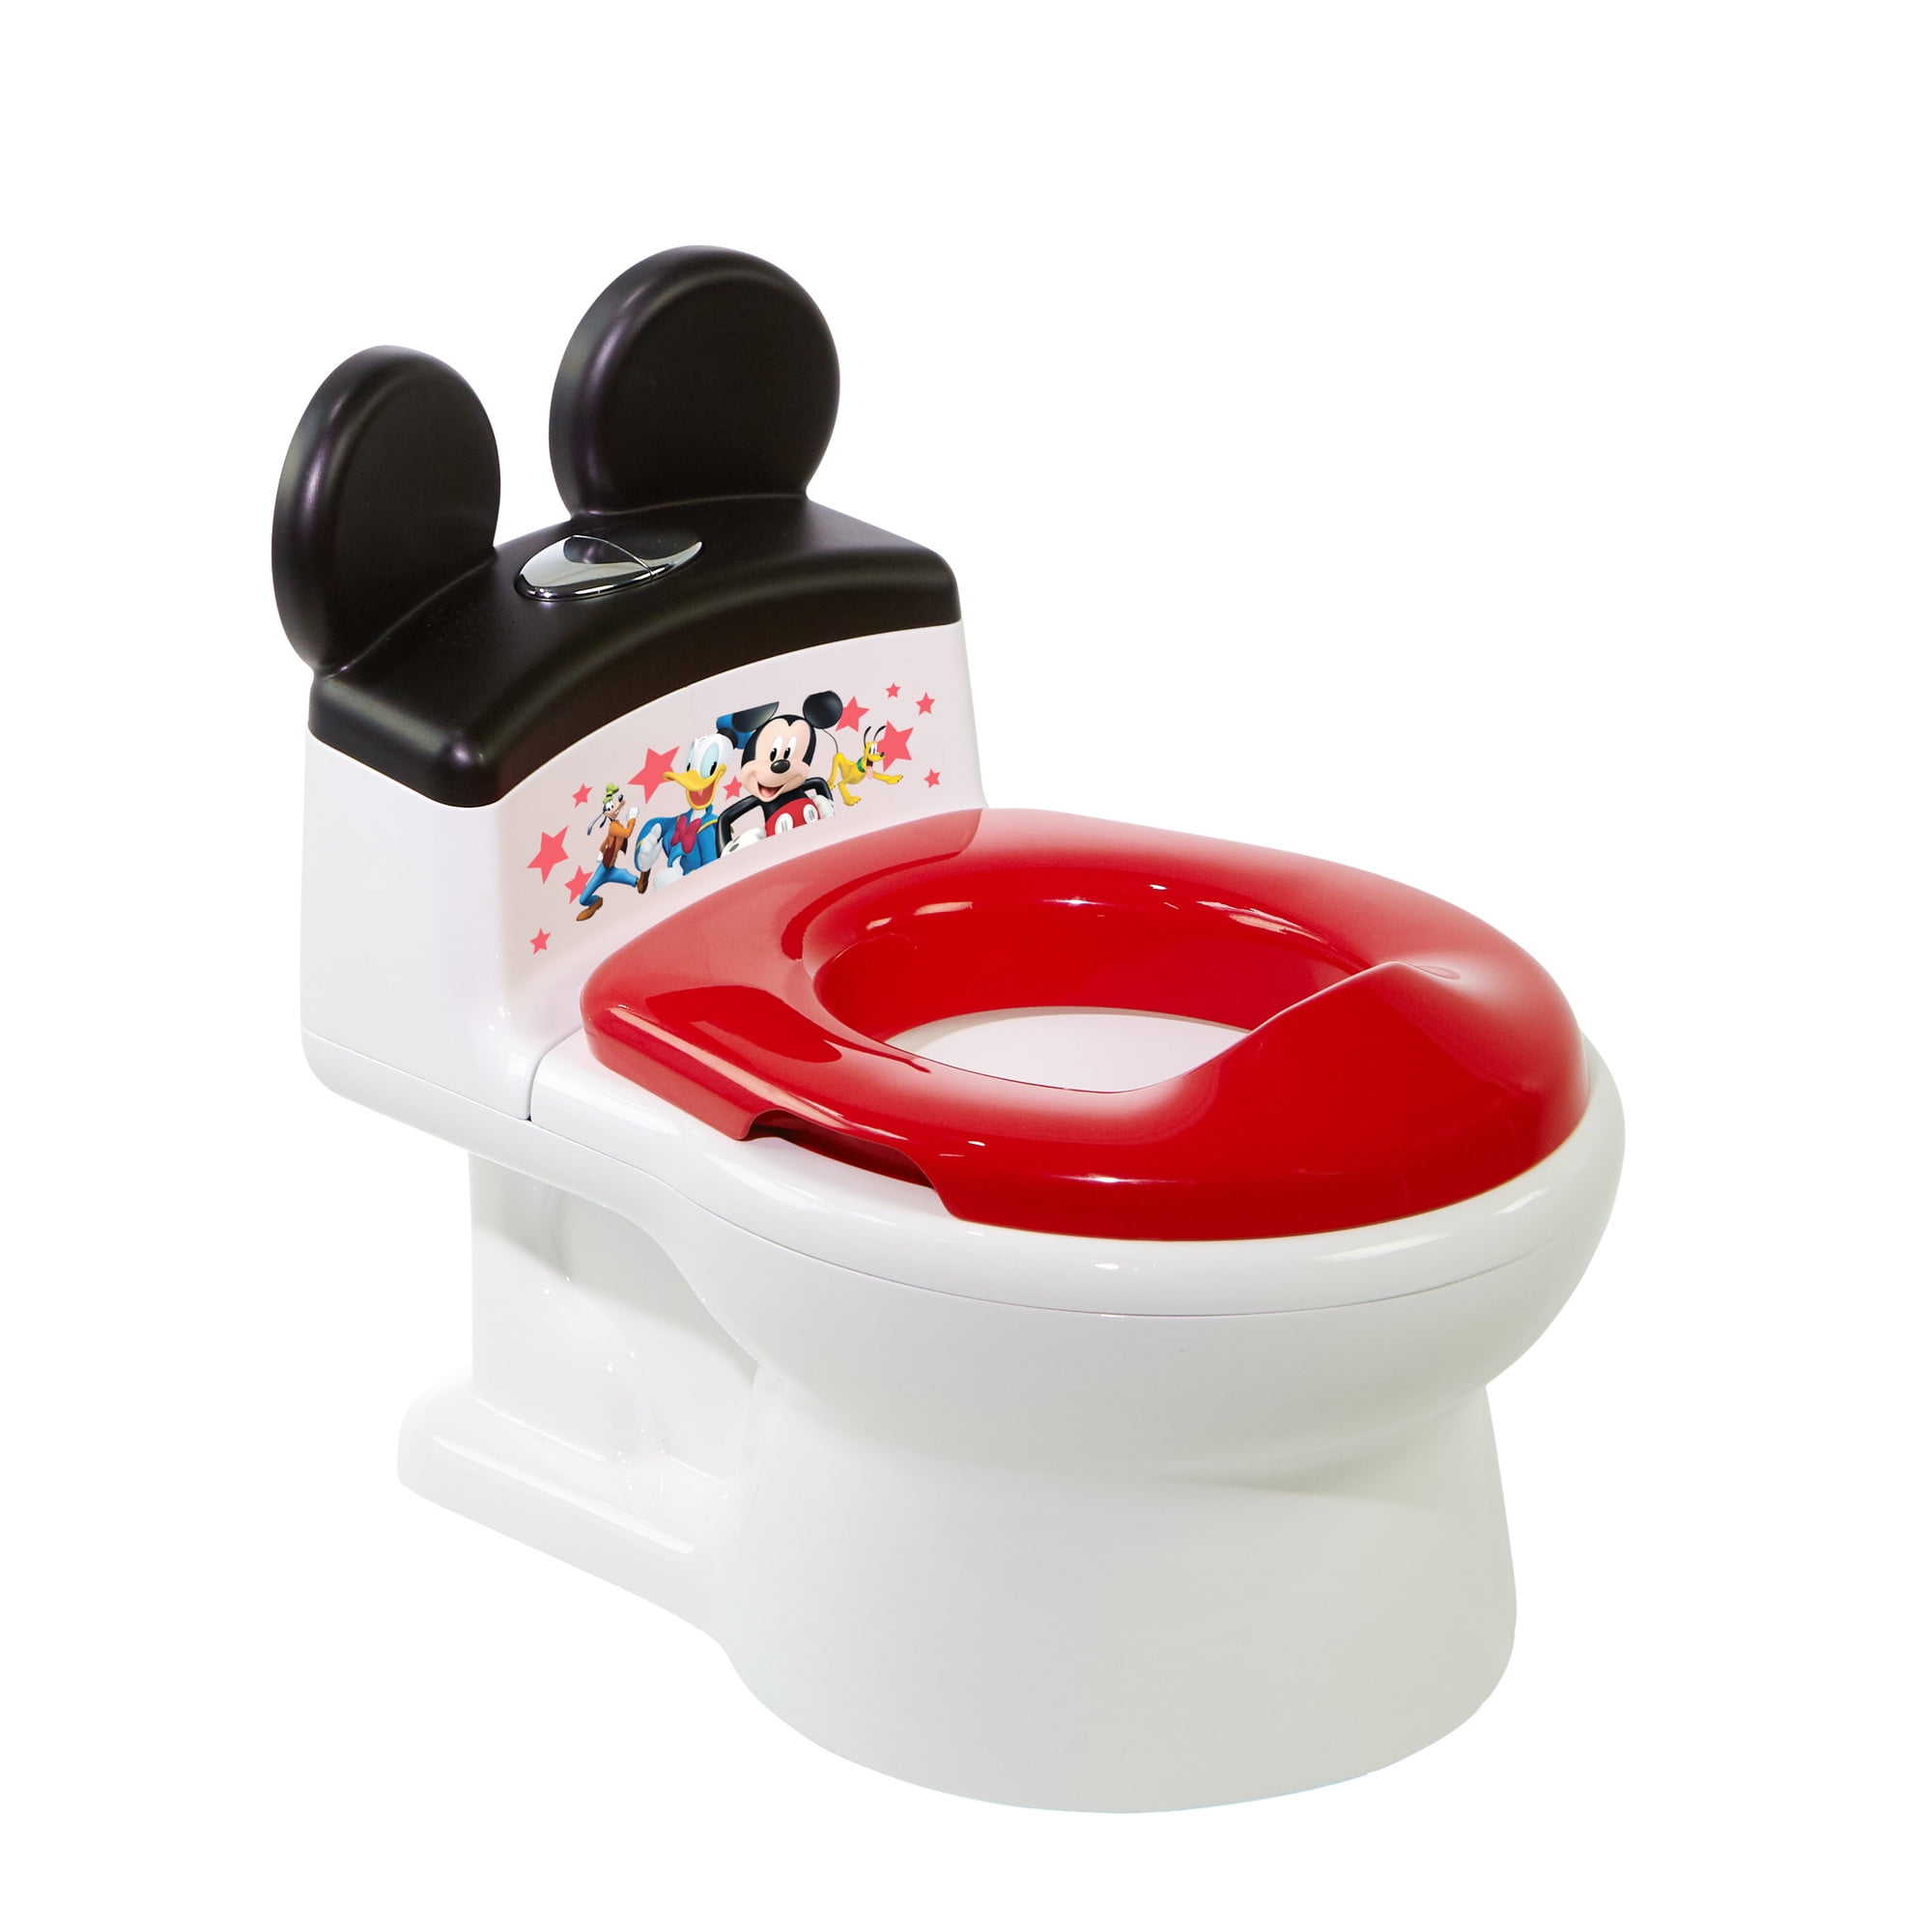 tablet potty chair